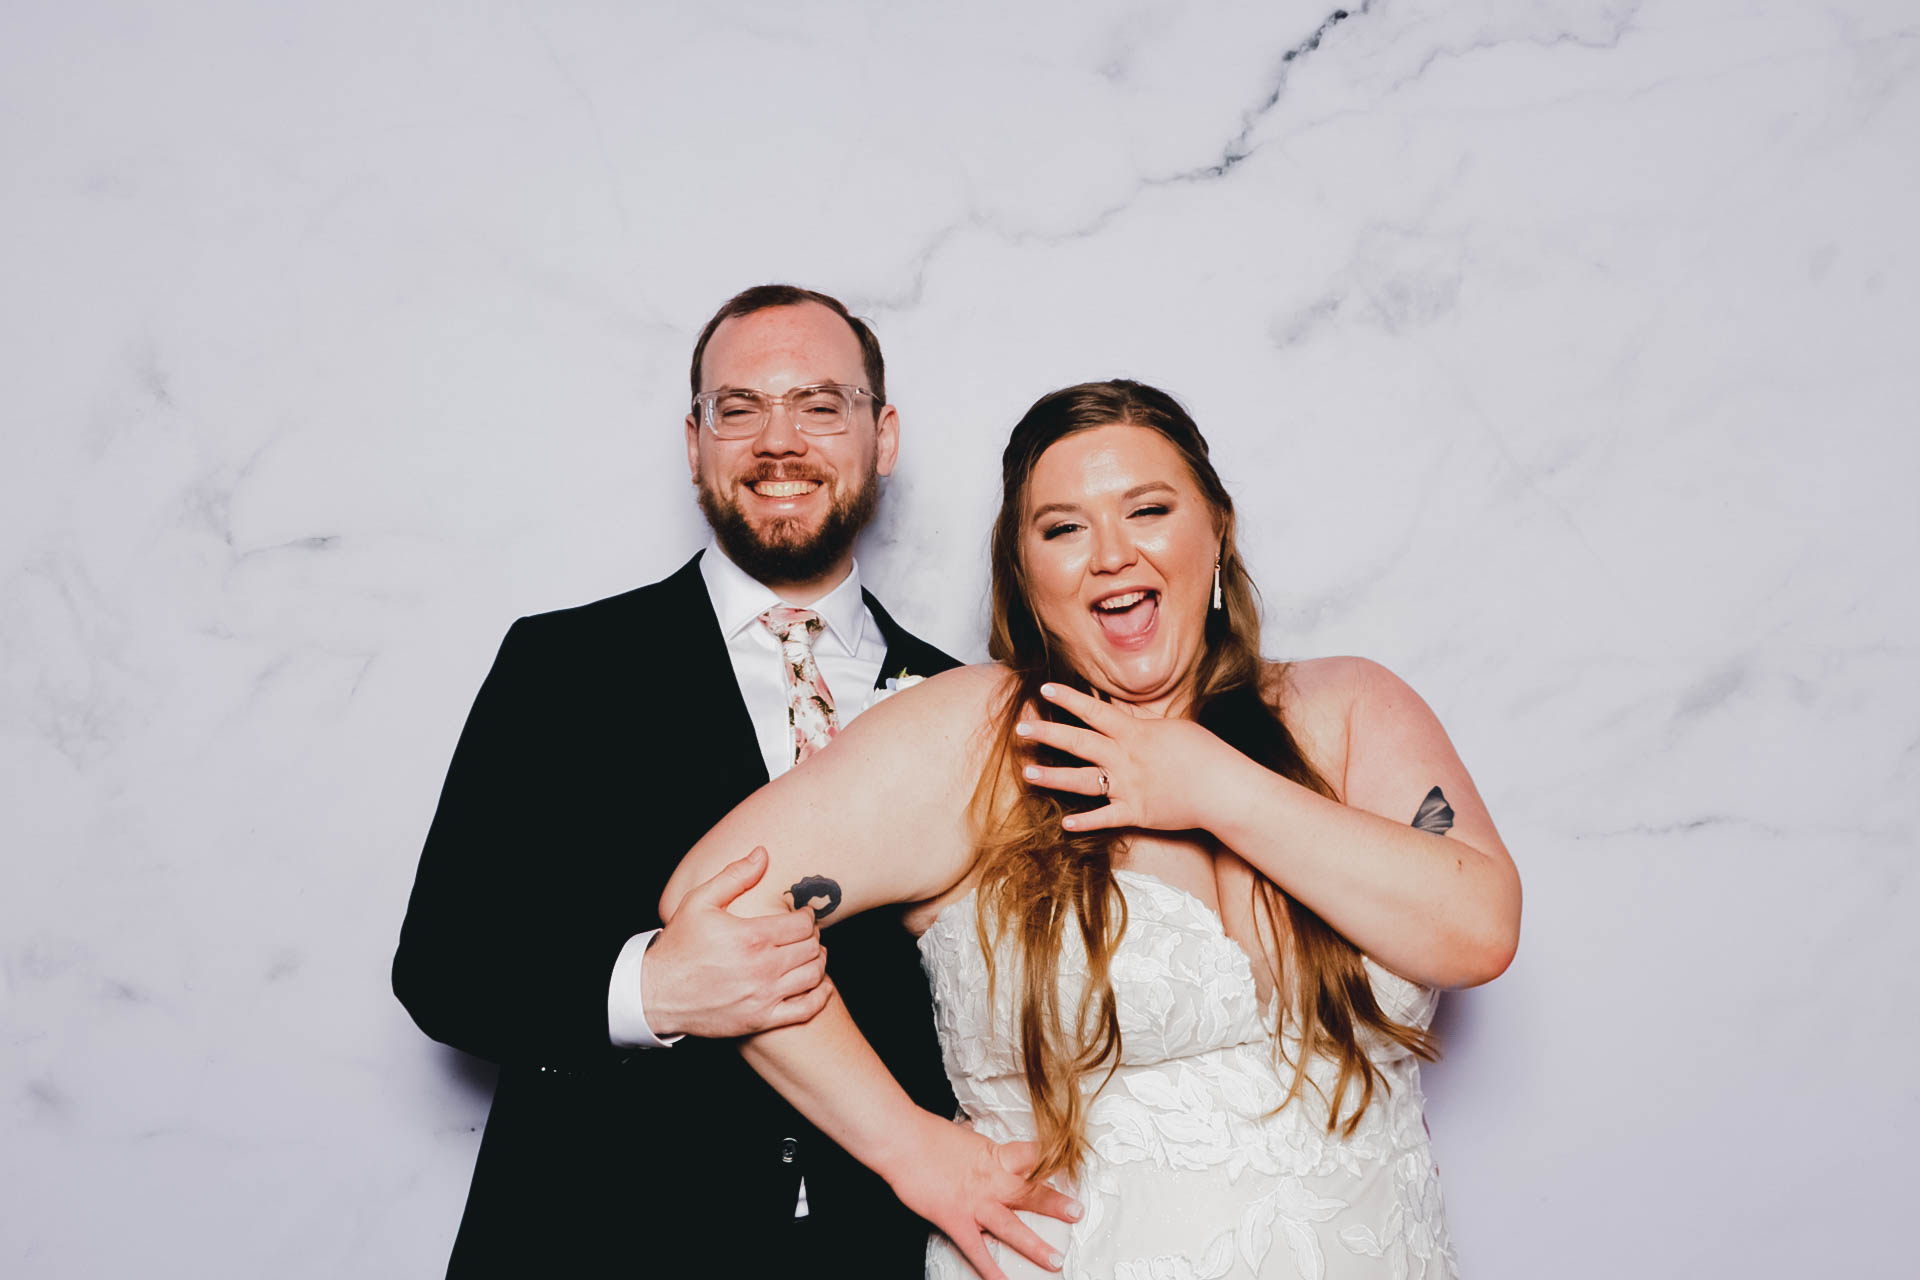 Bride and groom smiling at the camera on a marble background